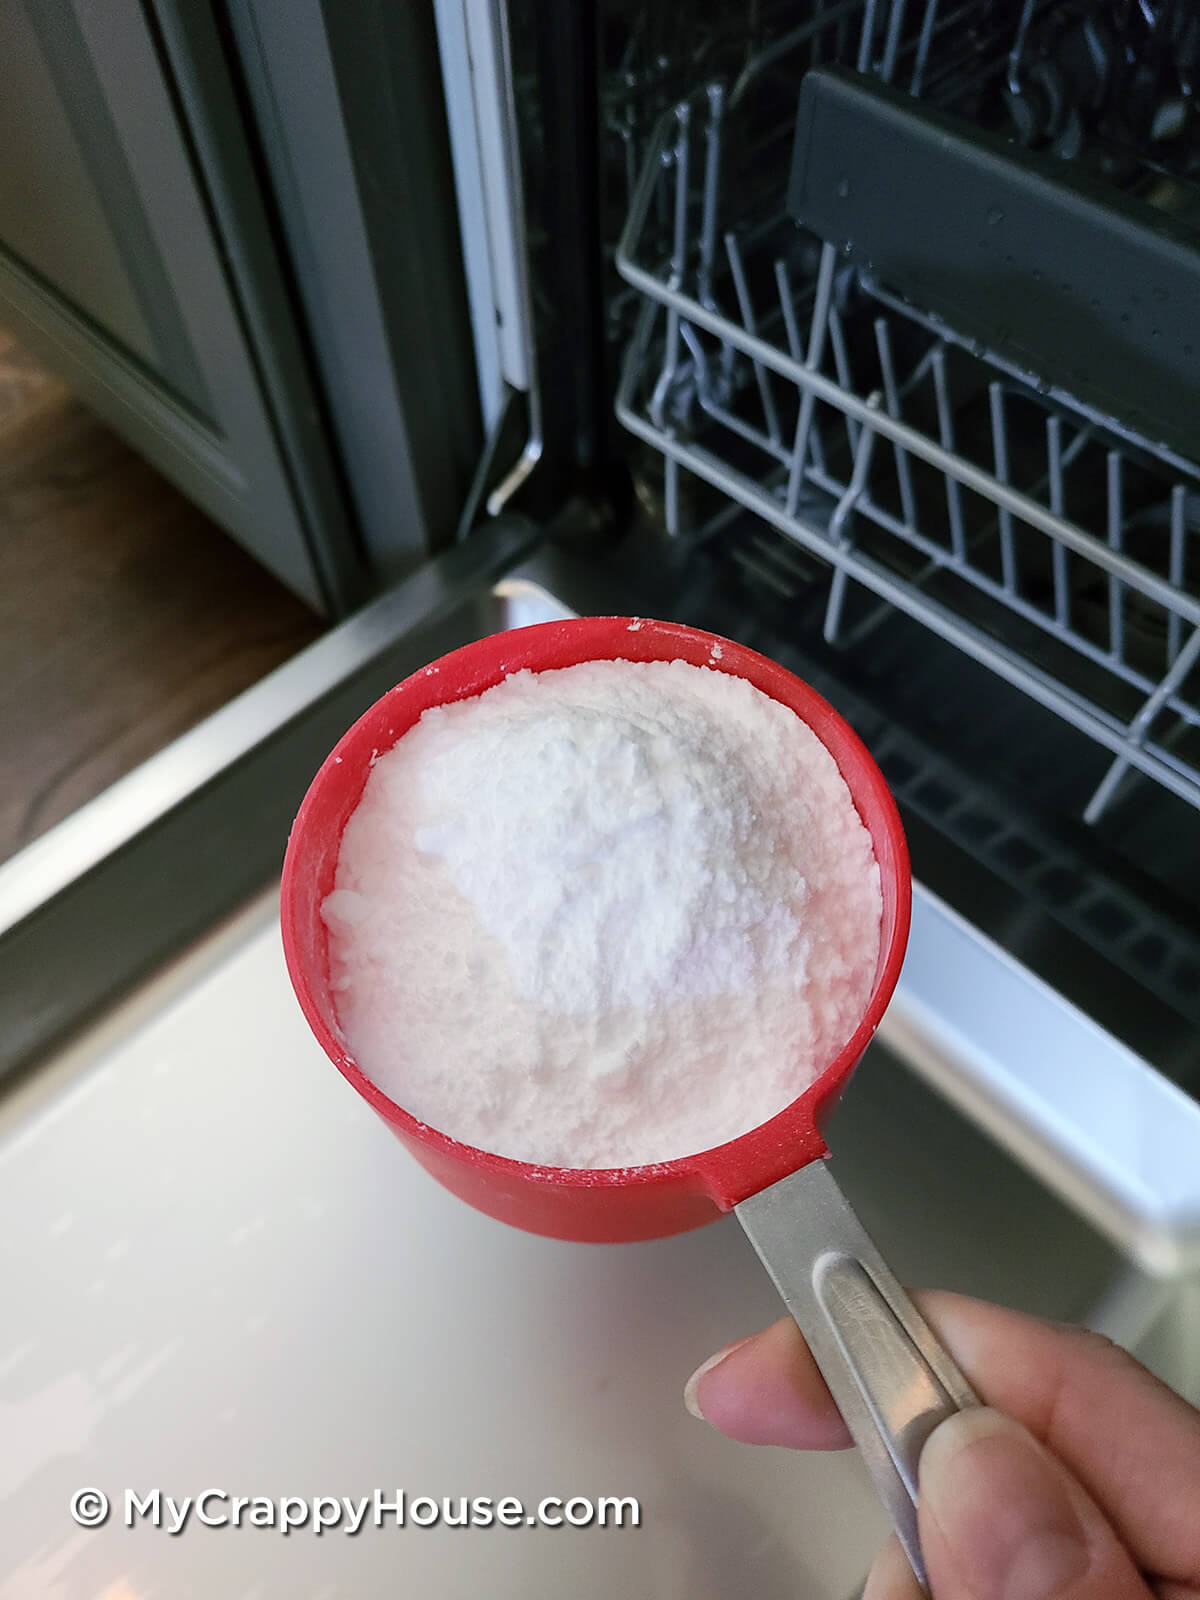 Baking soda in a measuring cup